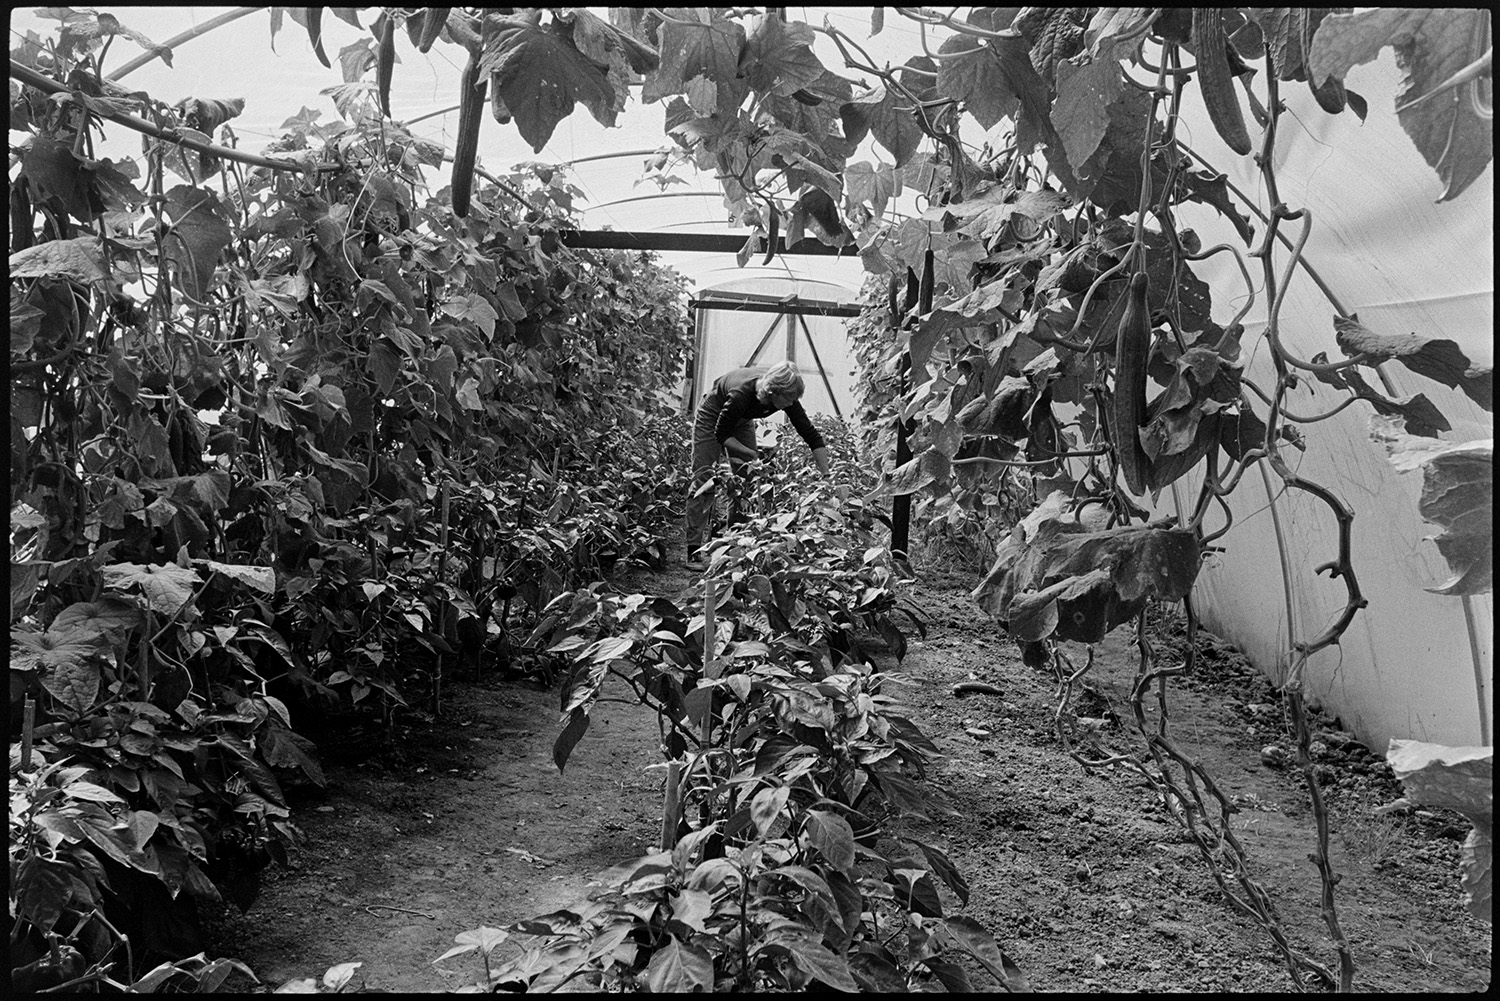 Woman working on herb farm herb garden and shop, chickens. 
[Sally Hollis checking cucumber plants in a polytunnel at Darracott Farm, Welcombe.]